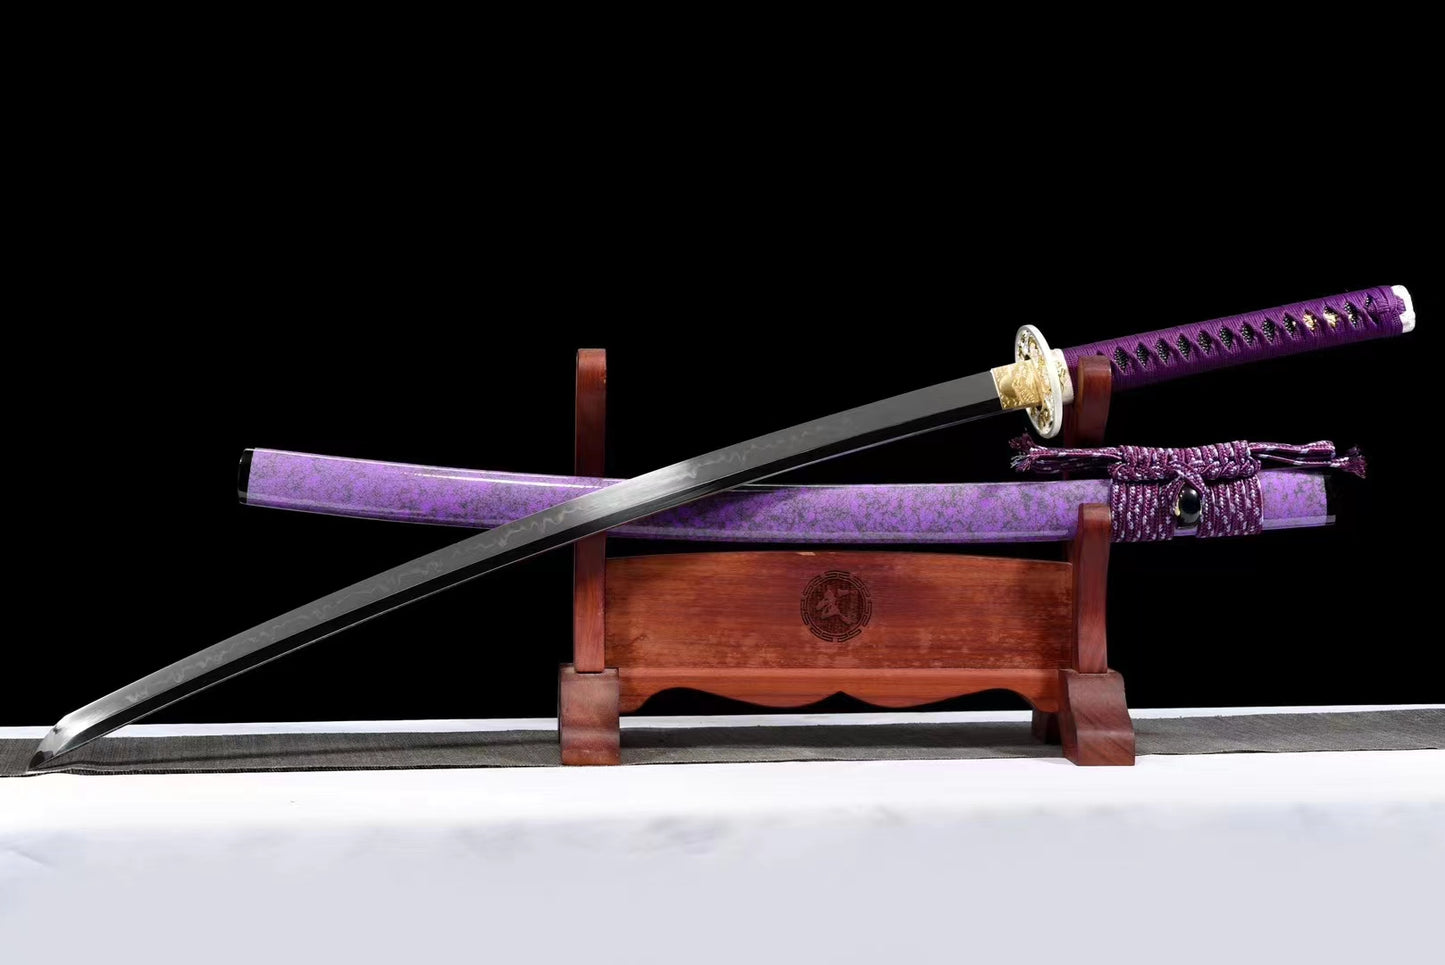 Purple Devil ,T10 covers the soil and burns the blade（18 grinding steps, mirror grinding, ）katana